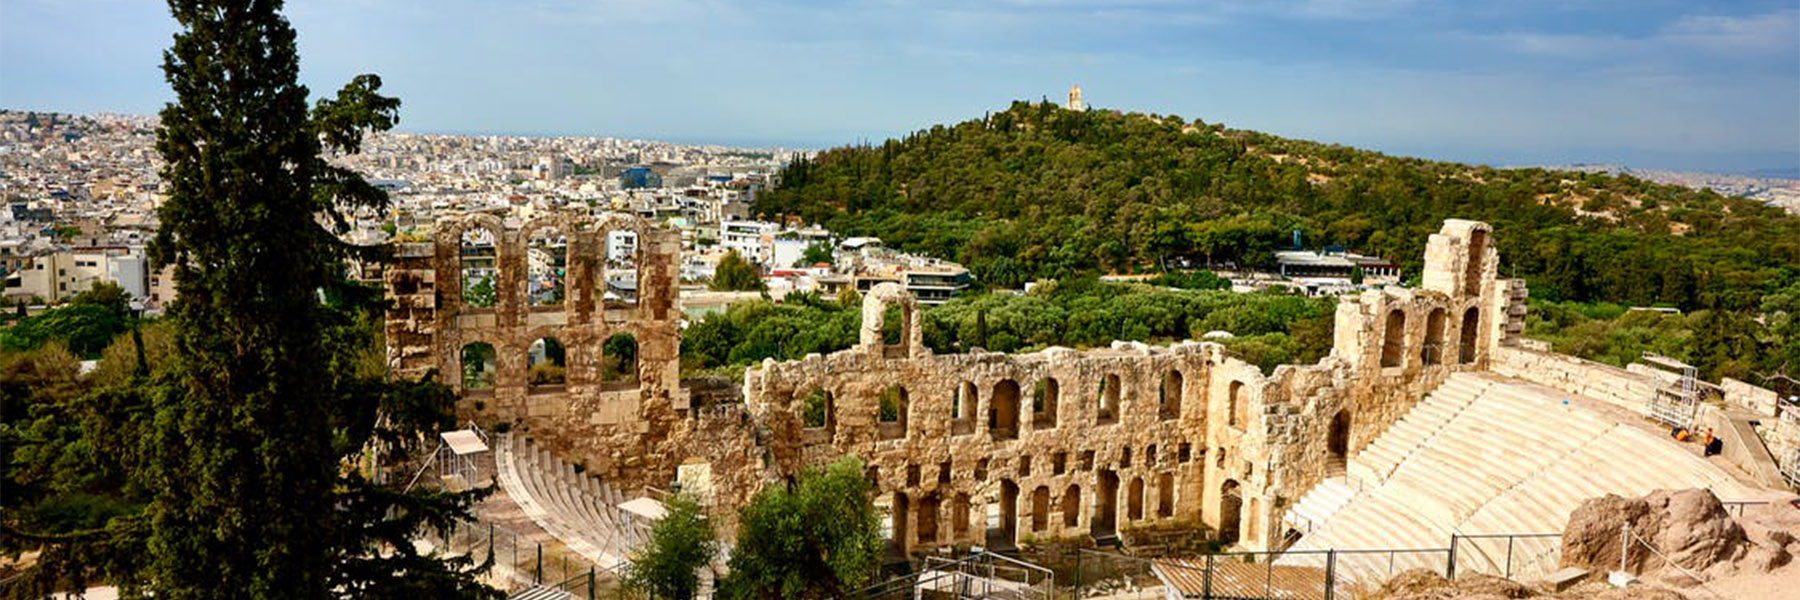 Athens, Greece. Odeon of Herodes Atticus